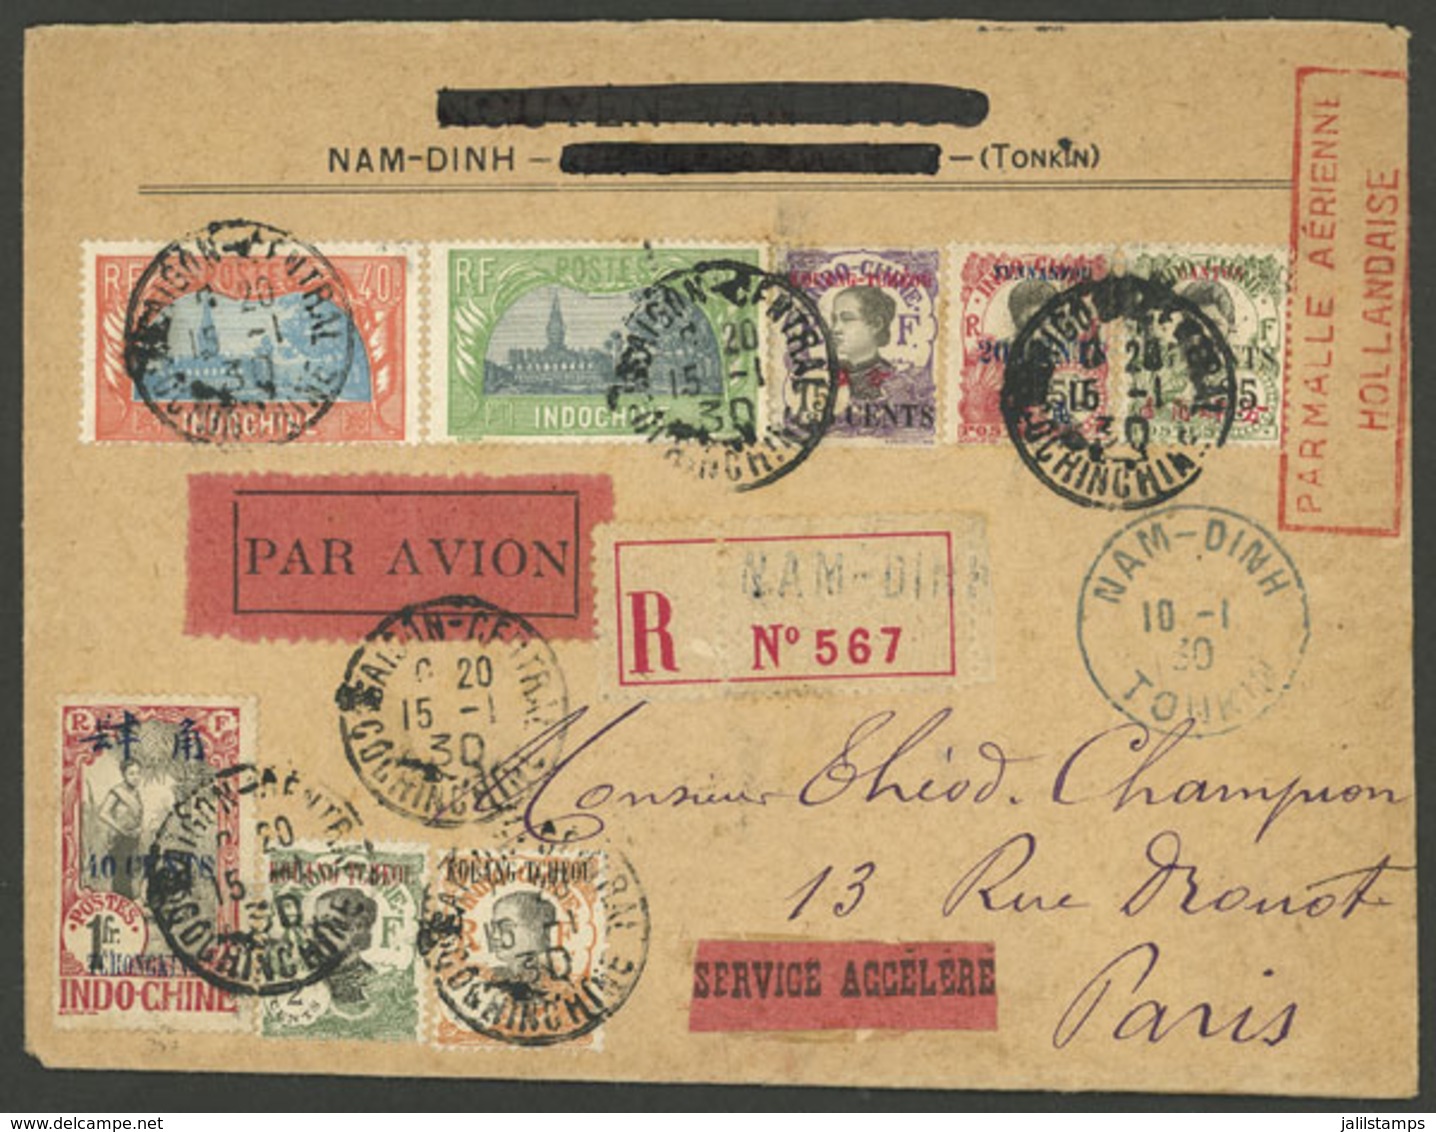 INDOCHINA: 15/JA/1930 Saigon - Paris, Second Flight By AA And KLM, Registered Cover With Very Nice Multicolor Postage, V - Sonstige - Asien